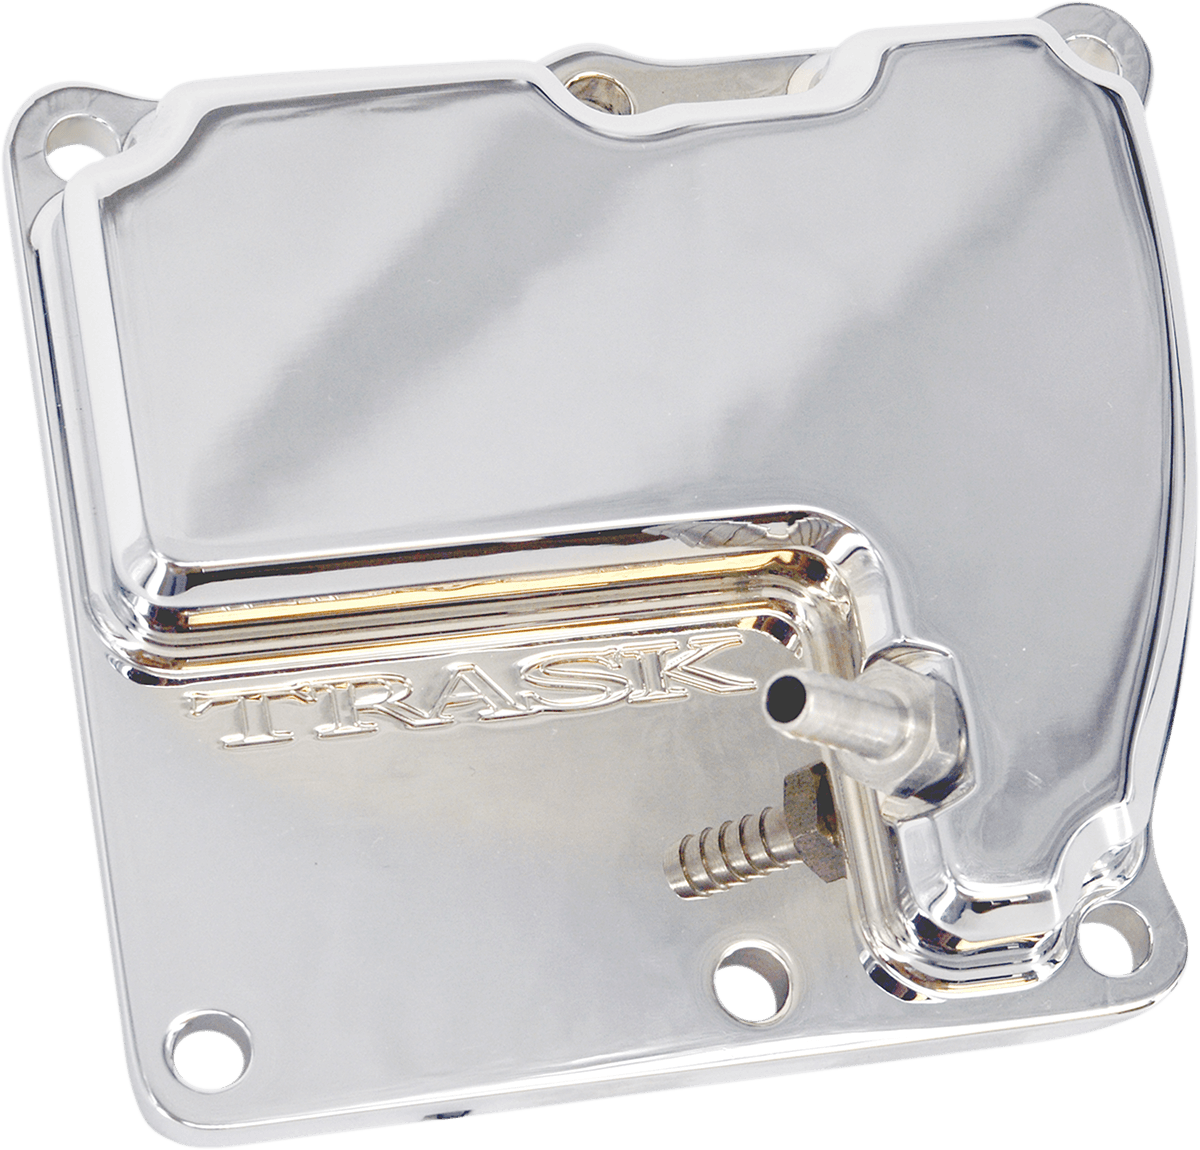 TRASK-Vented Transmission Top Cover / M8 - Bagger-Transmission Cover-MetalCore Harley Supply